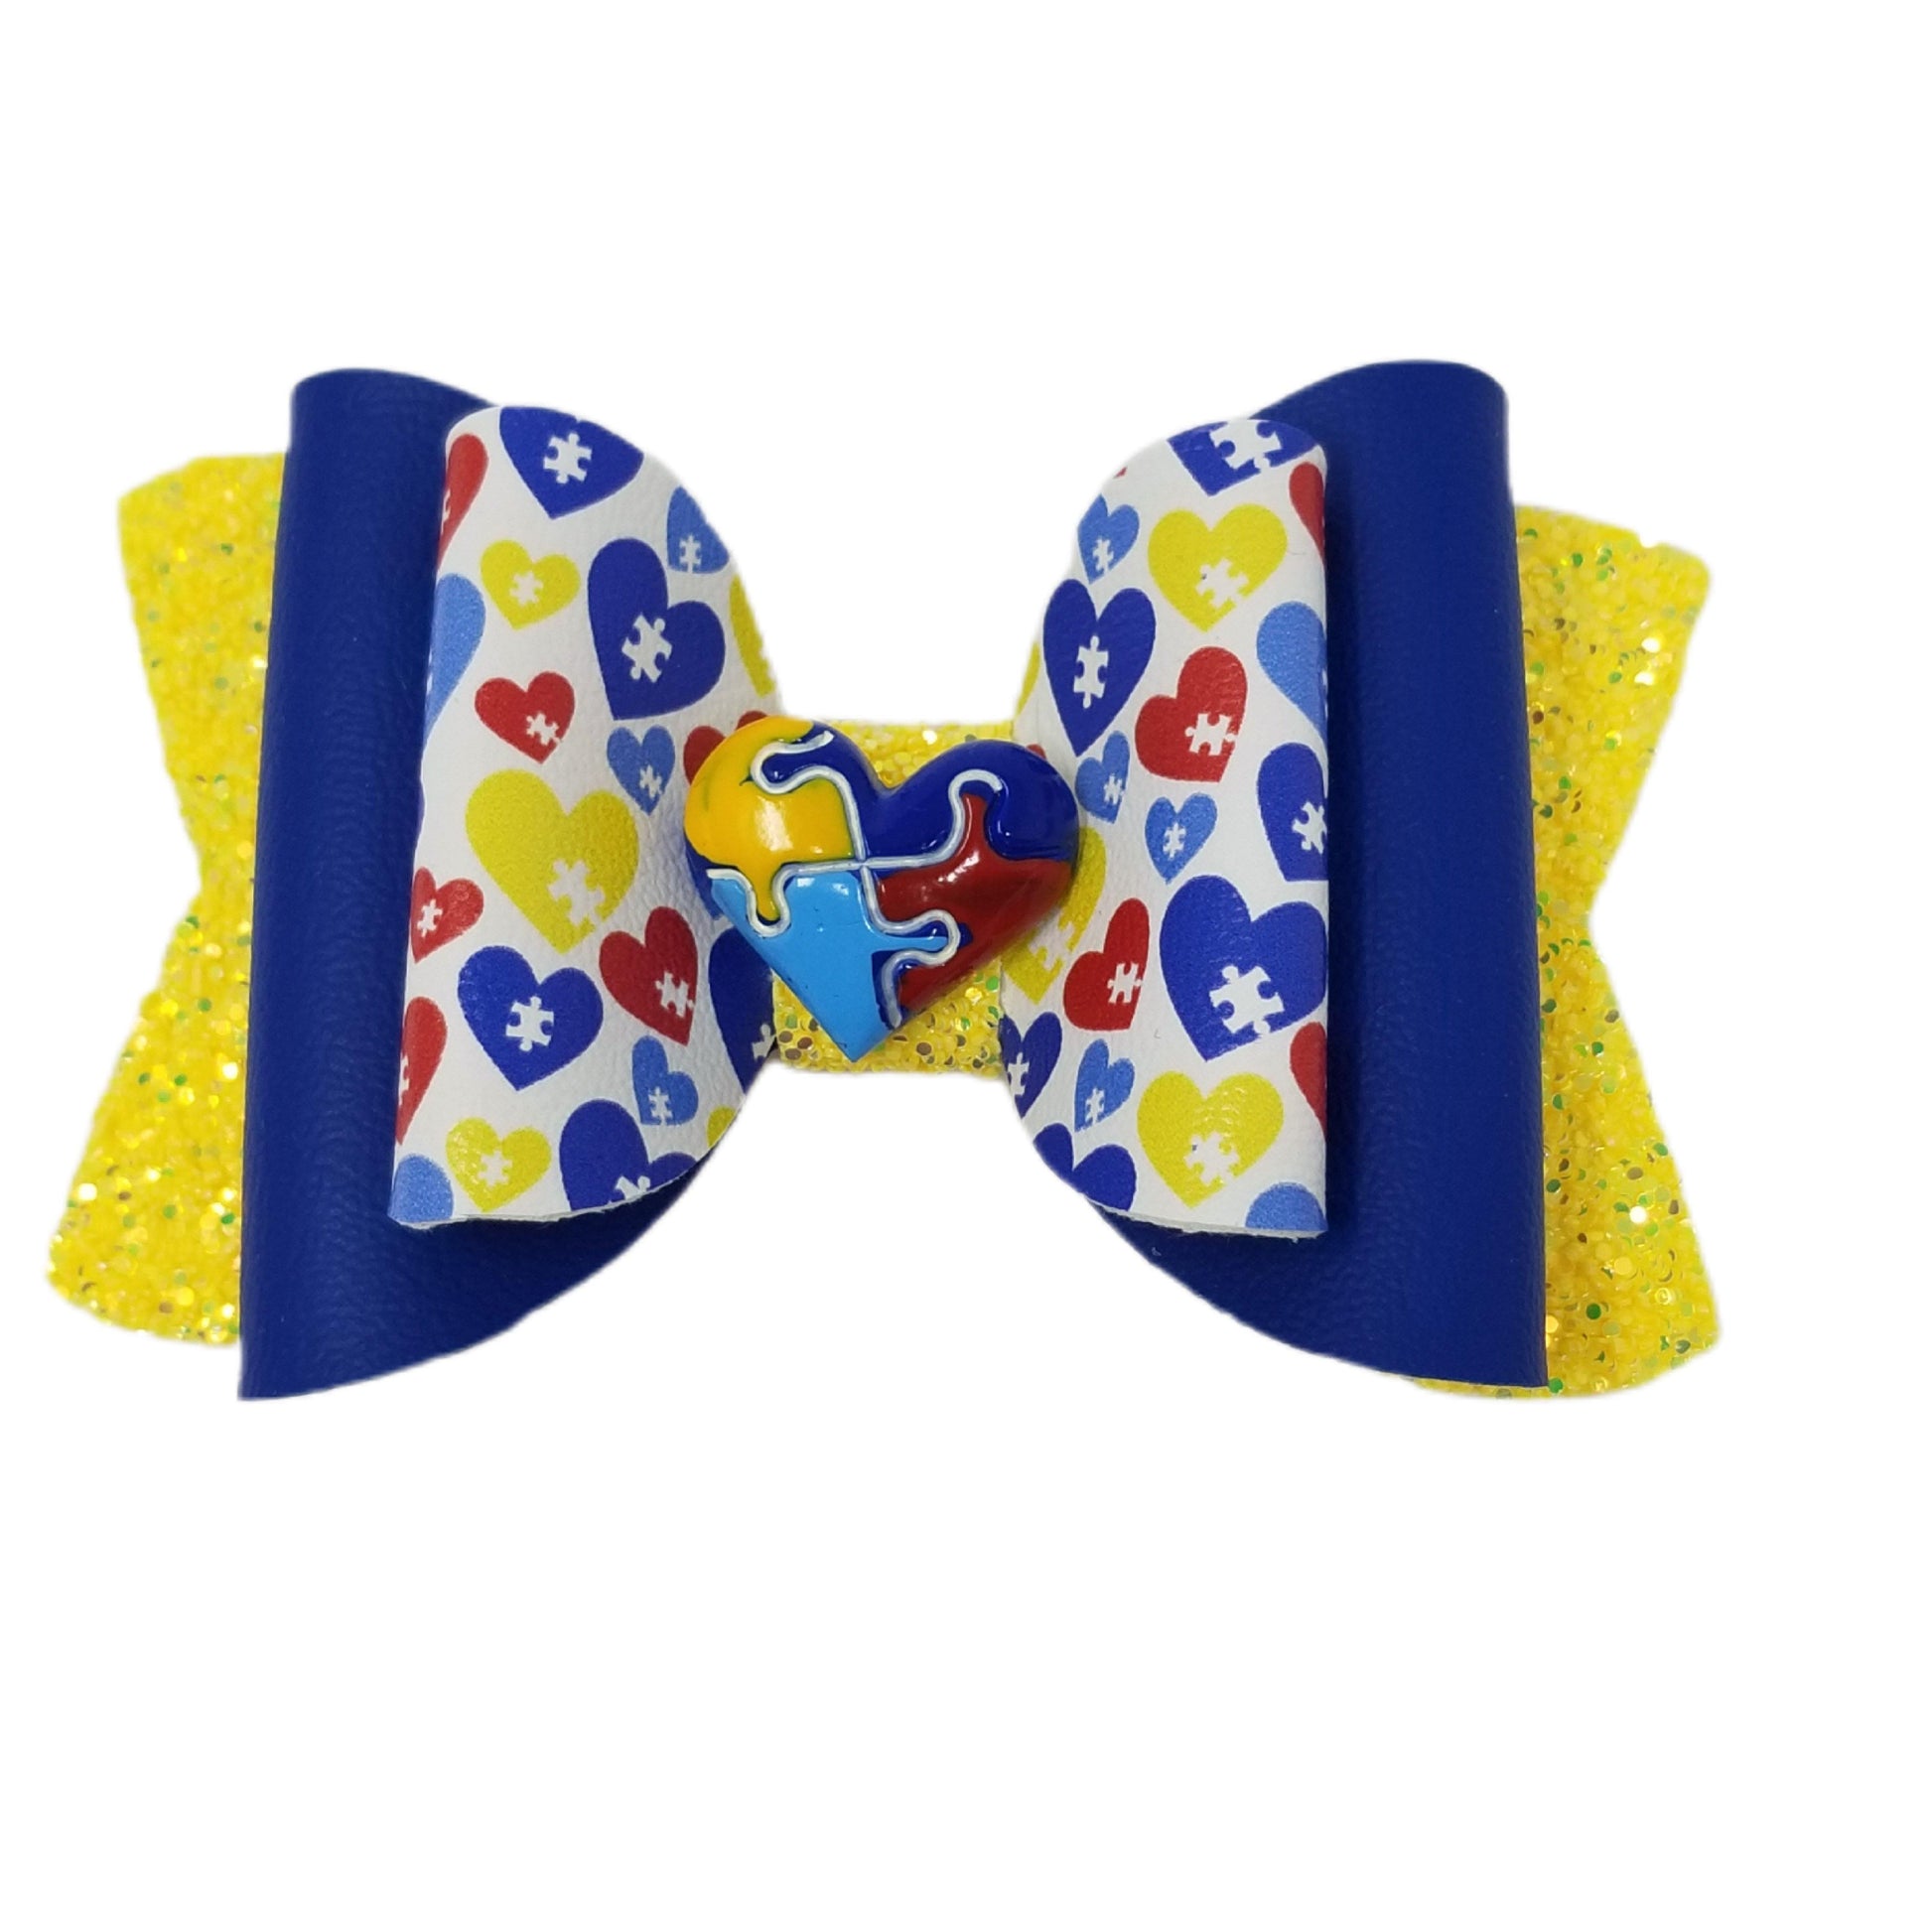 4.5 inch Heart Puzzle Double Chloe Bow with Heart Puzzle Clay